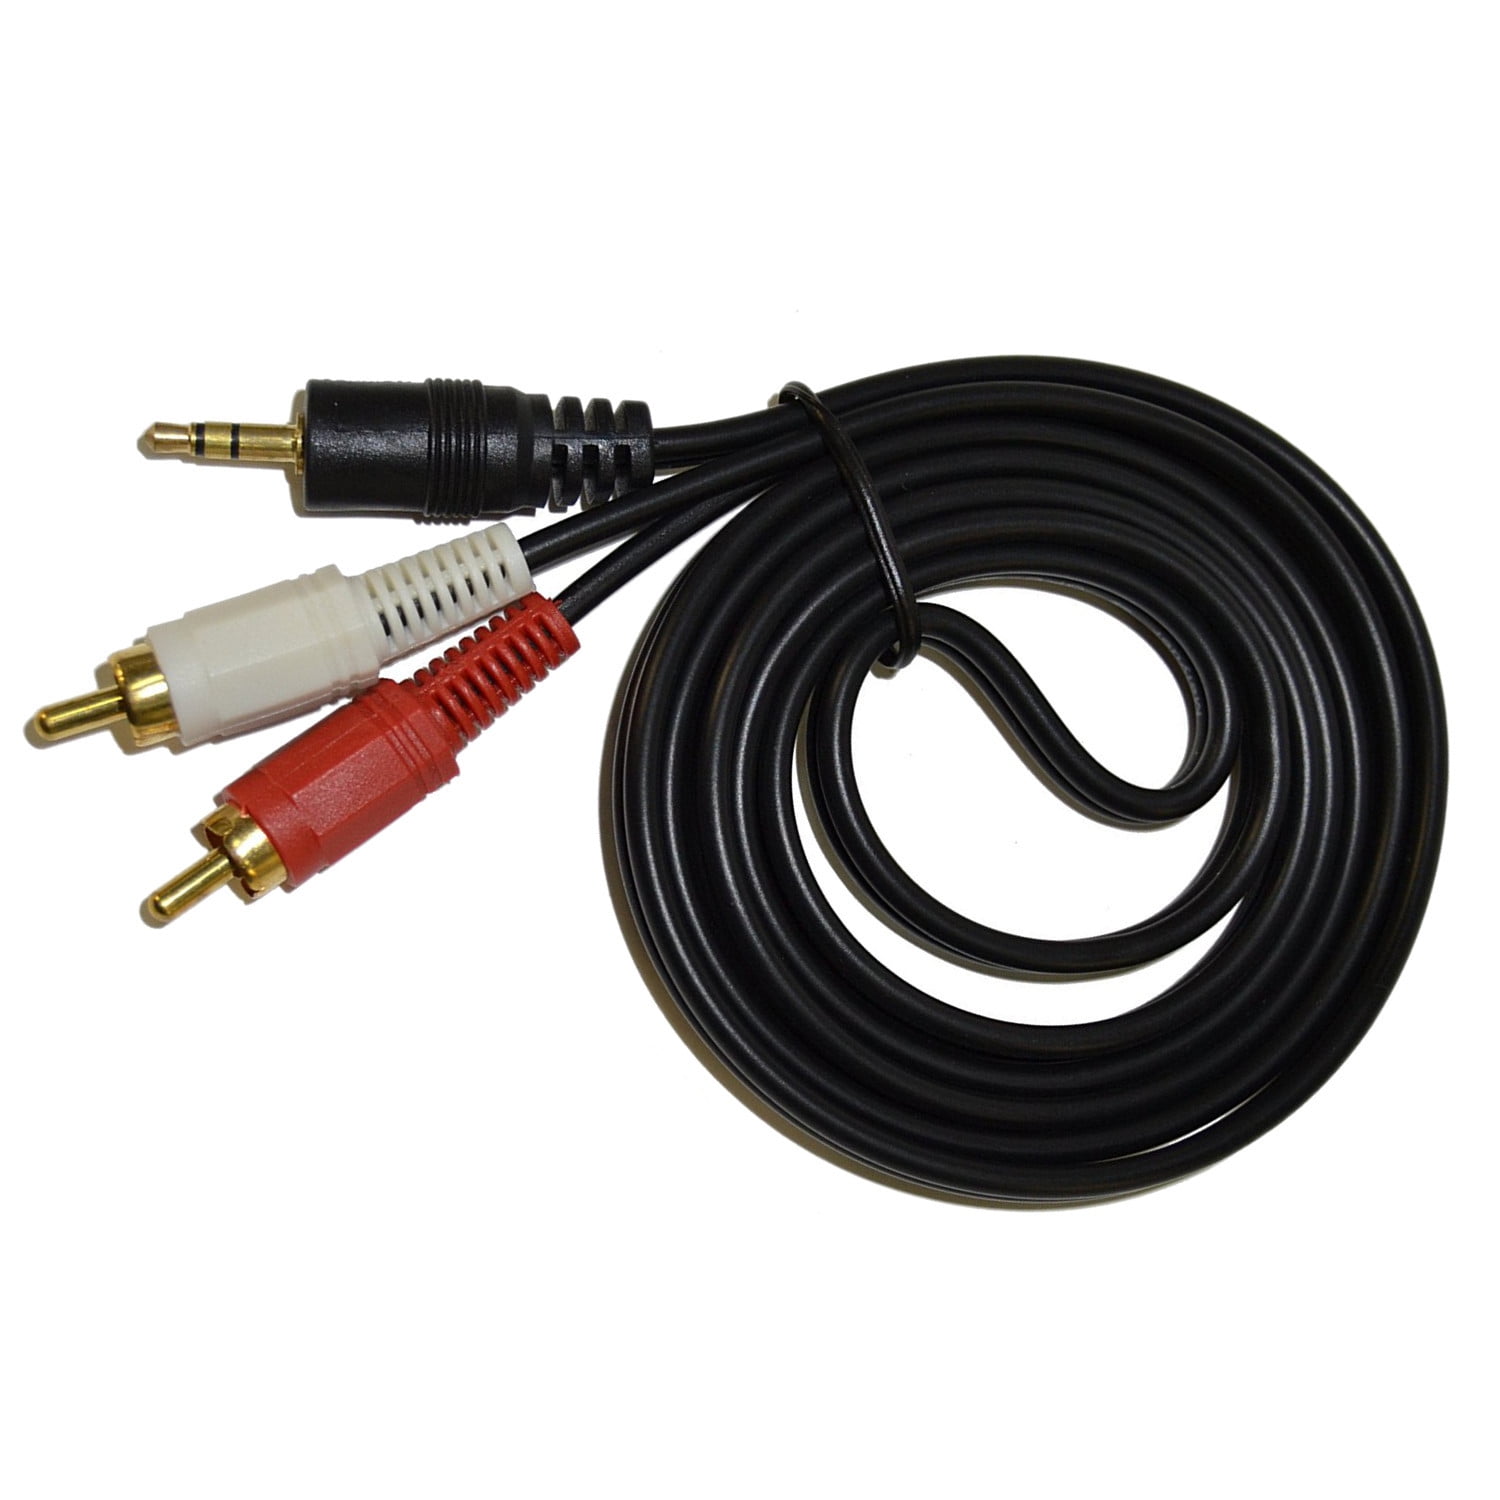  J&D 1/4 to RCA Cable, 1/4 TRS to Dual RCA Insert Cable Gold  Plated Audiowave Series 6.35mm Stereo Jack to 2 RCA Male Stereo Audio  Adapter Y Splitter RCA Cable, 3